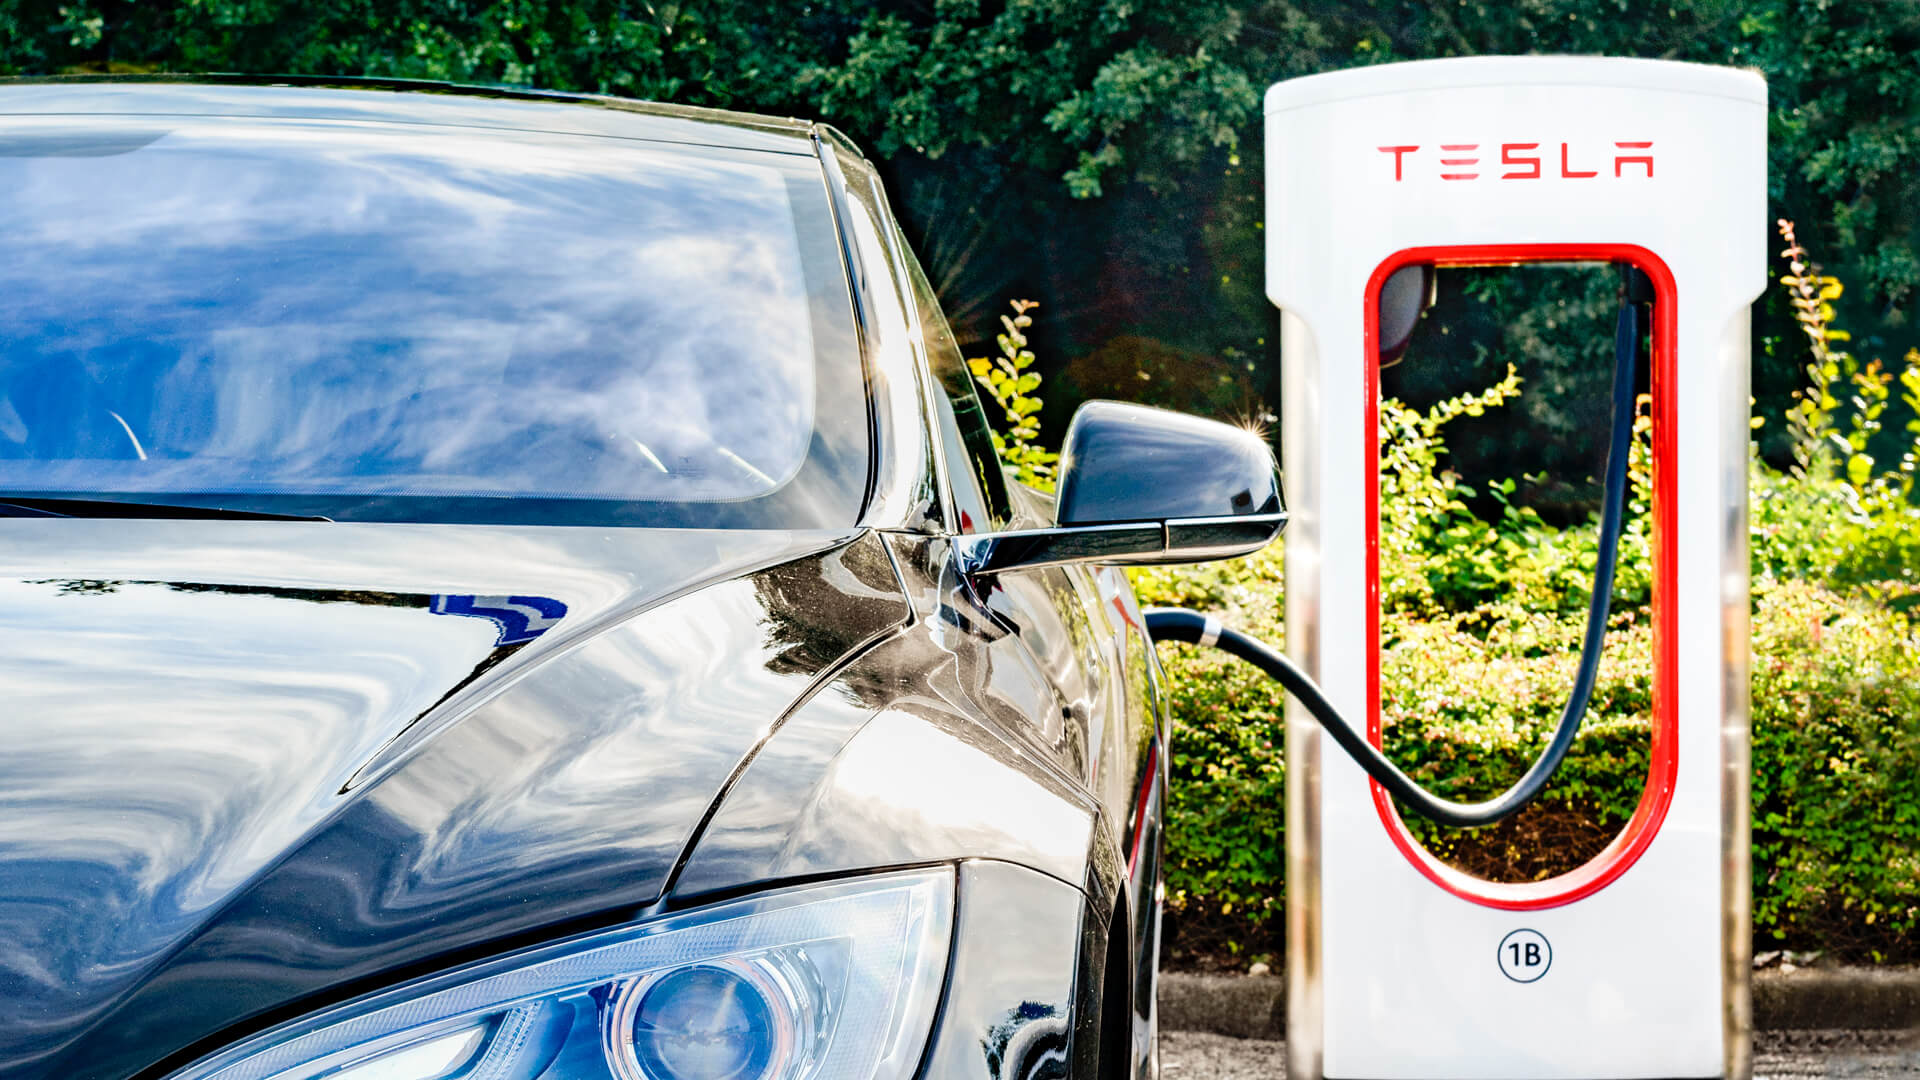 5 Questions To Ask Before Buying an Electric Vehicle